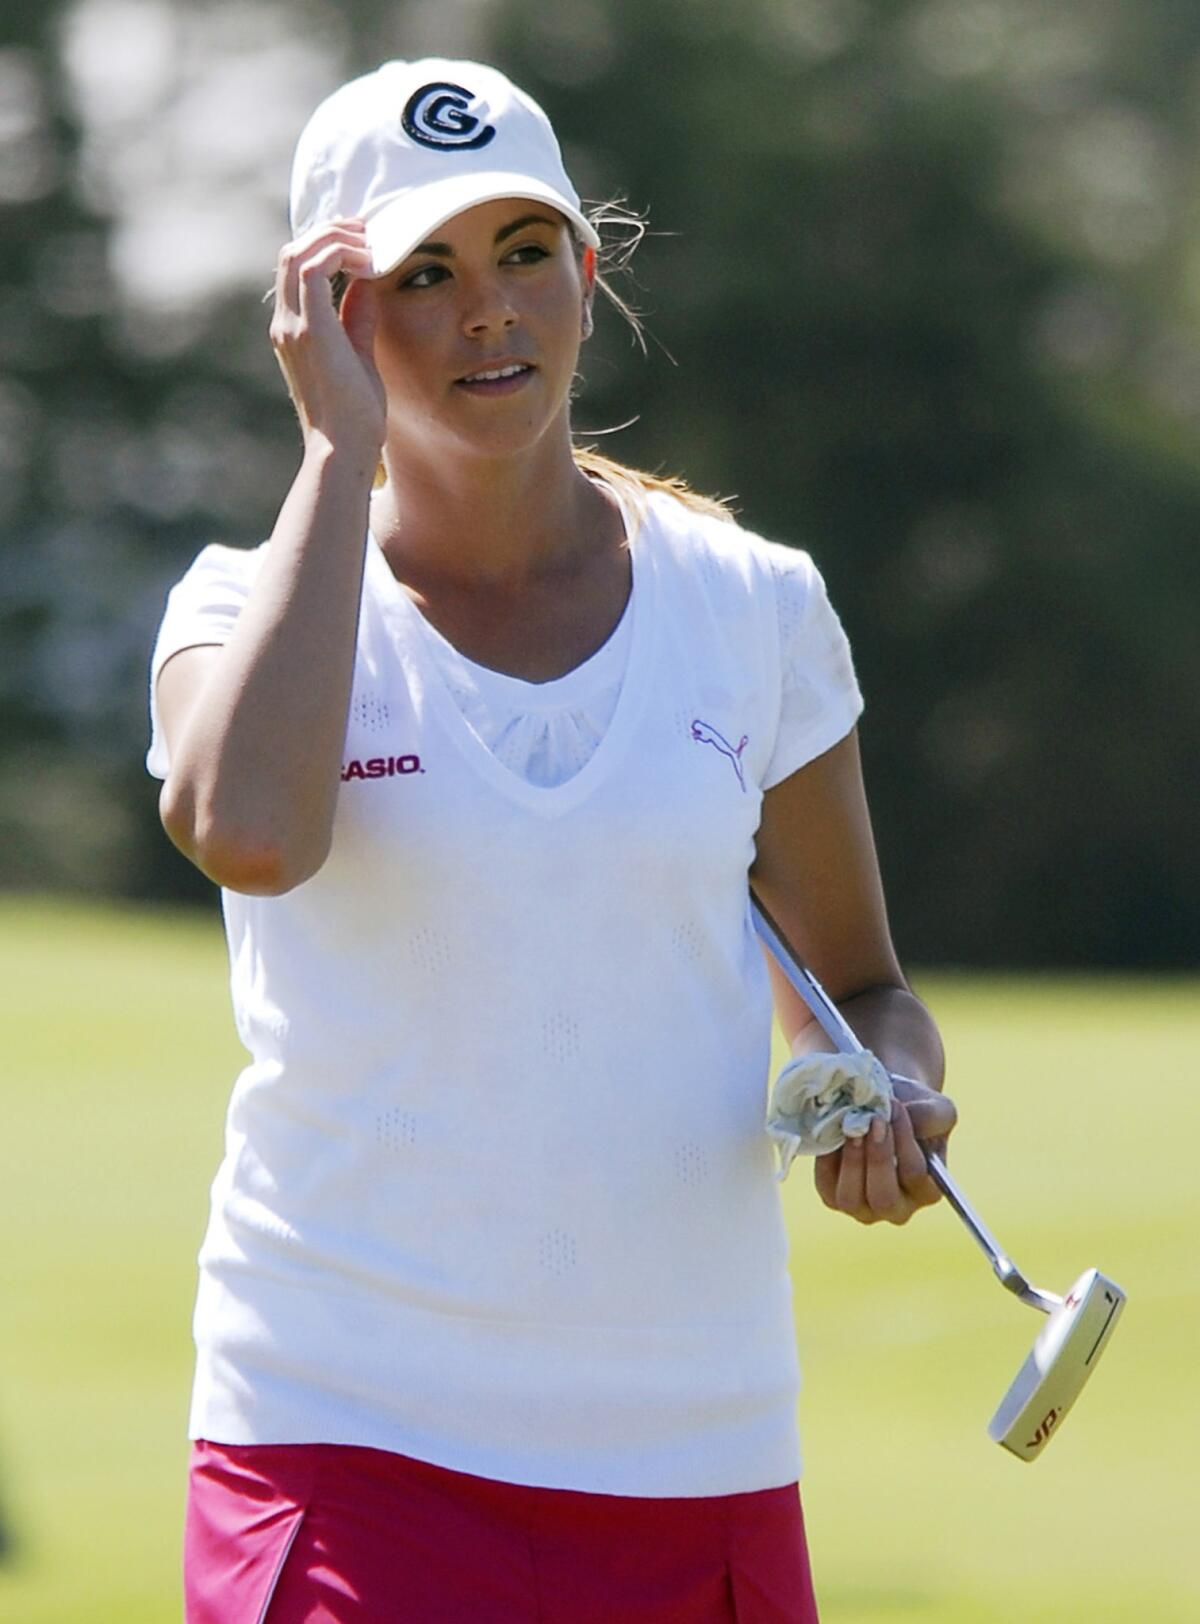 Erica Blasberg, shown in 2008, won about $300,000 in her first four seasons on the LPGA Tour but then fell on hard times, was struck by illness and depression, and took her own life in 2010.